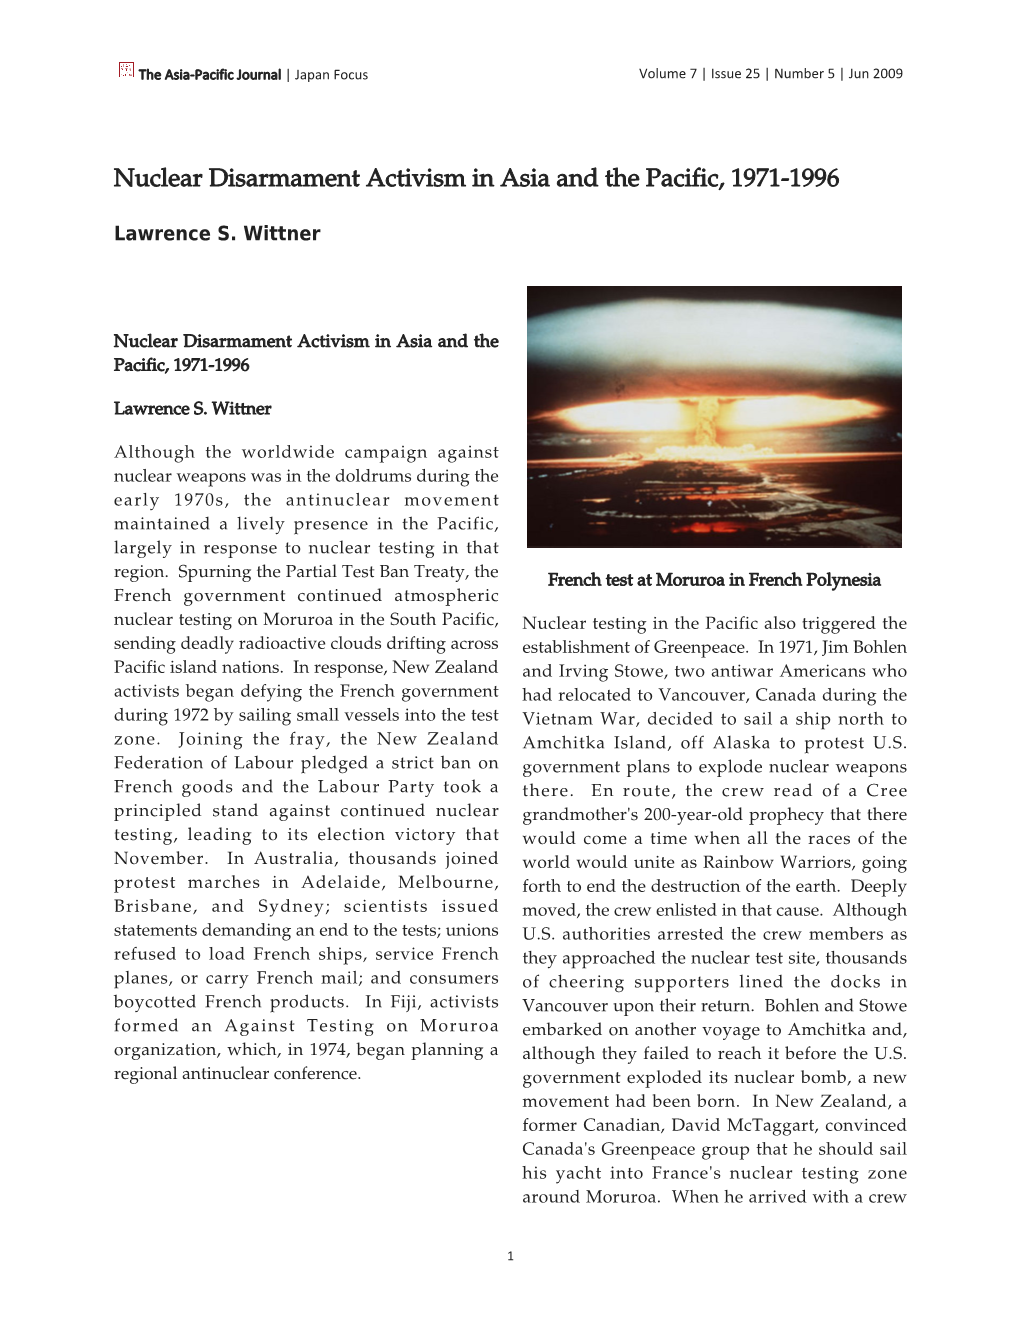 Nuclear Disarmament Activism in Asian and the Pacific, 1971-1996